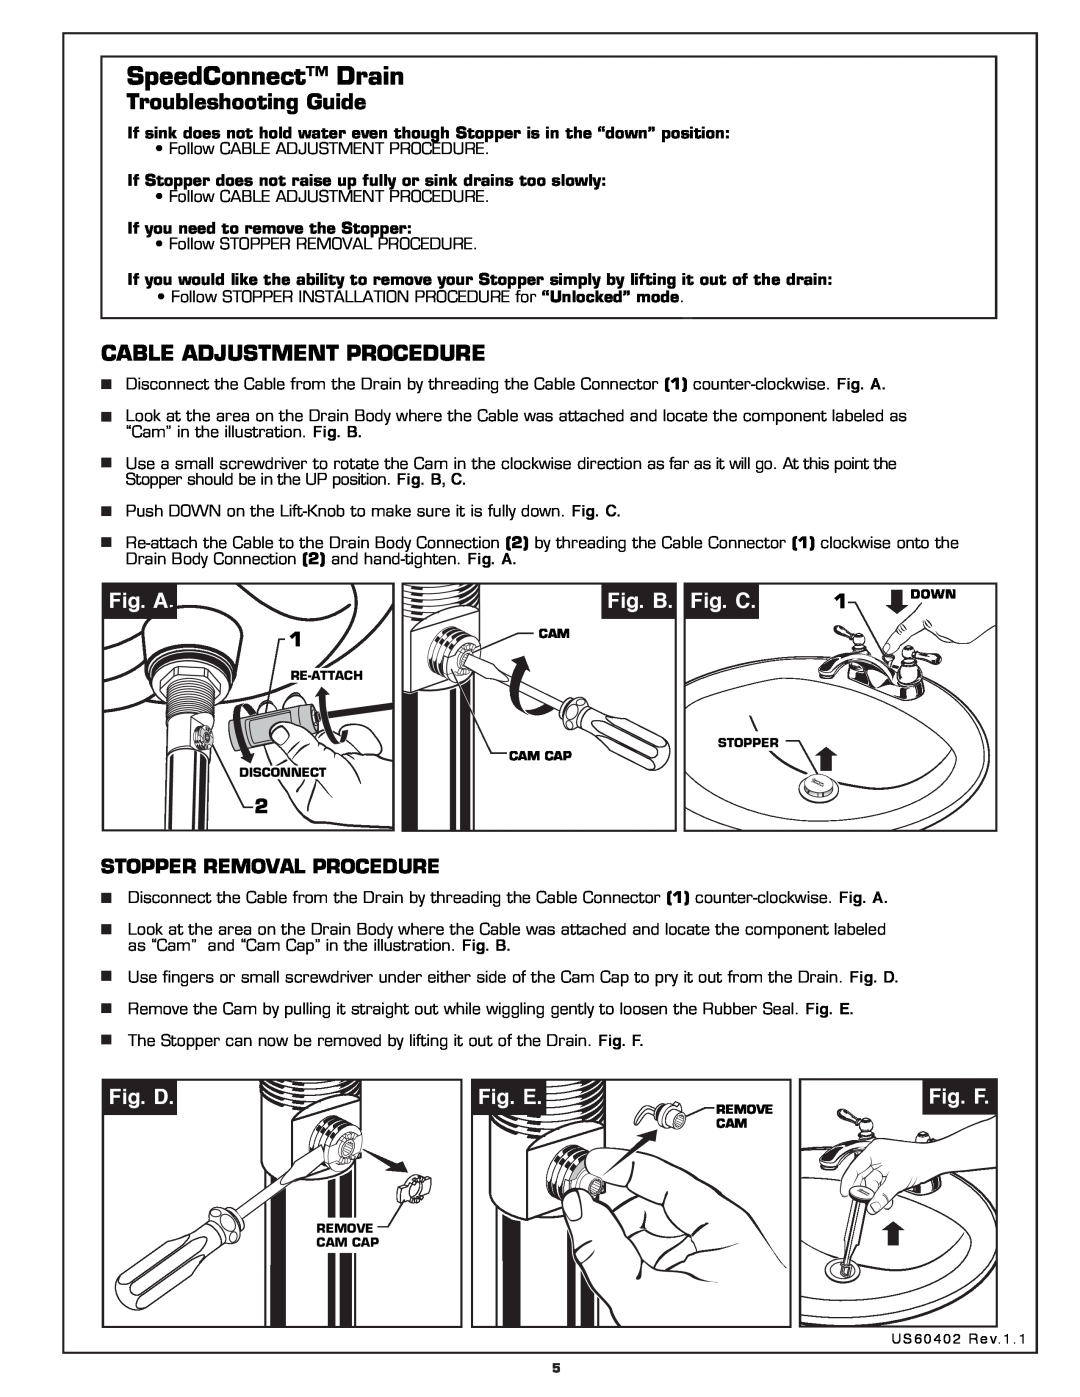 American Standard 7411.722 Troubleshooting Guide, Cable Adjustment Procedure, Fig. A, Fig. B, Fig. C, Fig. D, Fig. E 